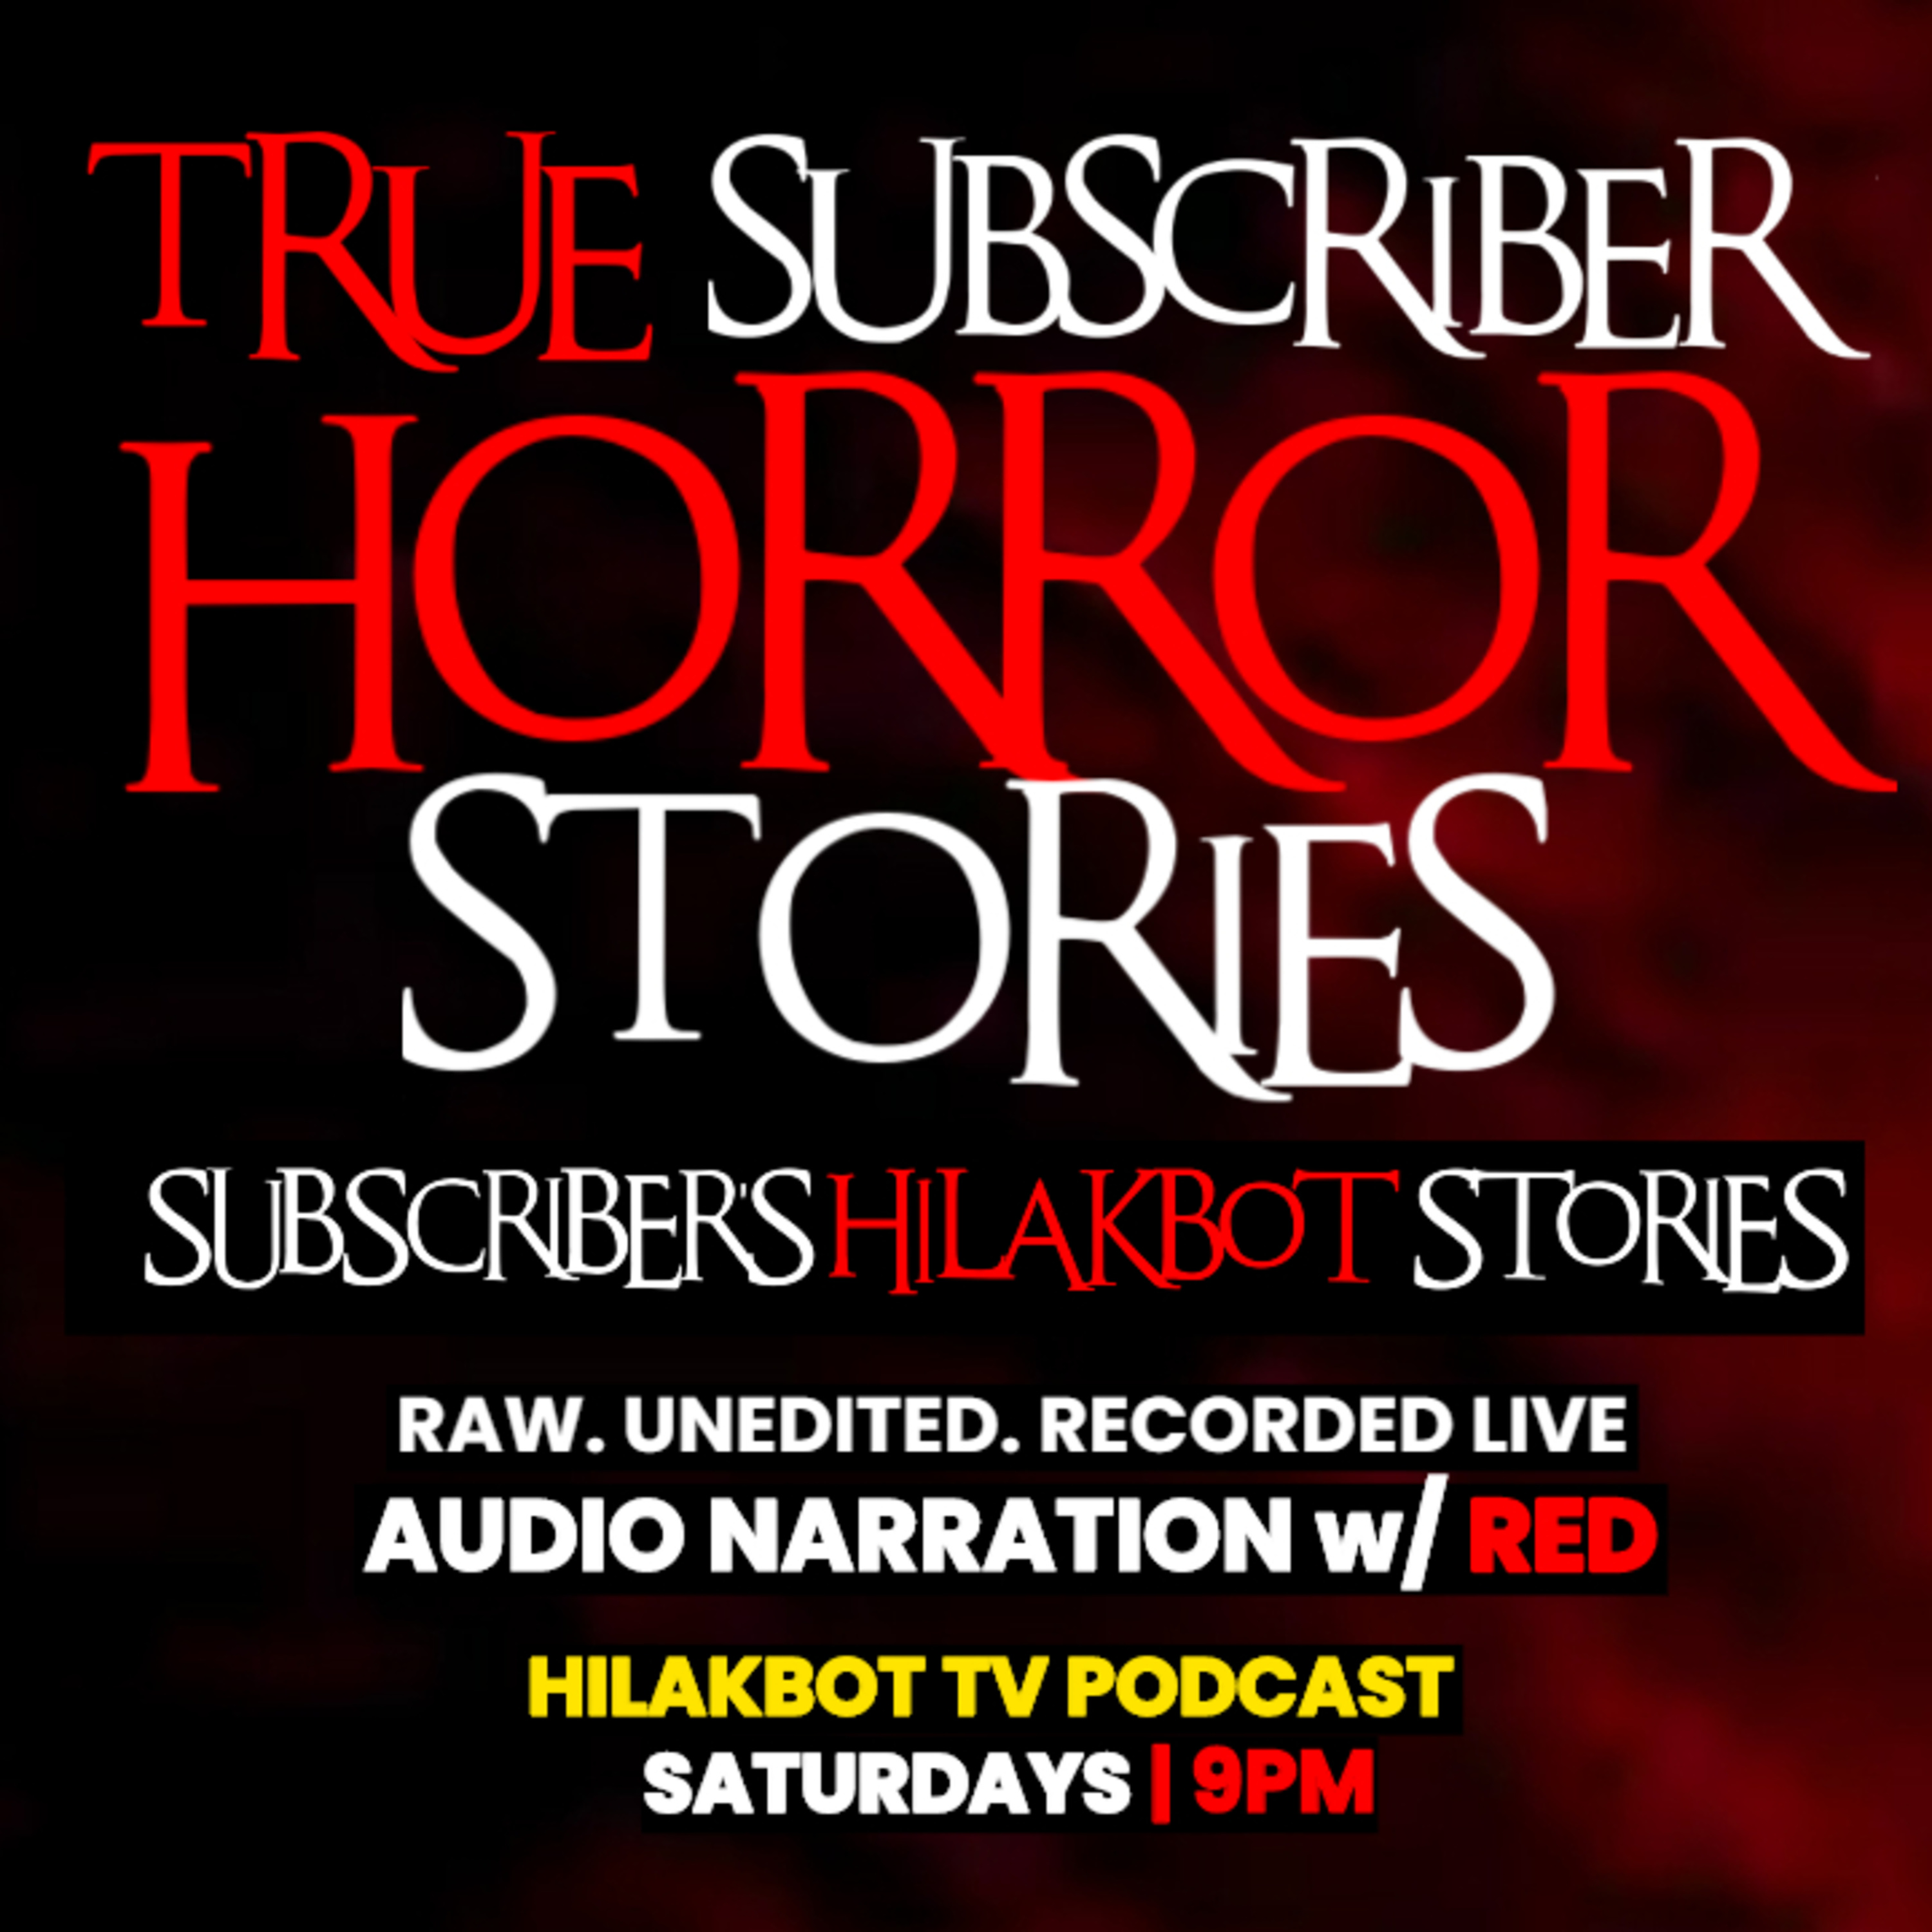 SUBSCRIBER'S HILAKBOT STORIES EPISODE 33 - Live Narration w/ RED | Listener's Submitted True Scary Stories